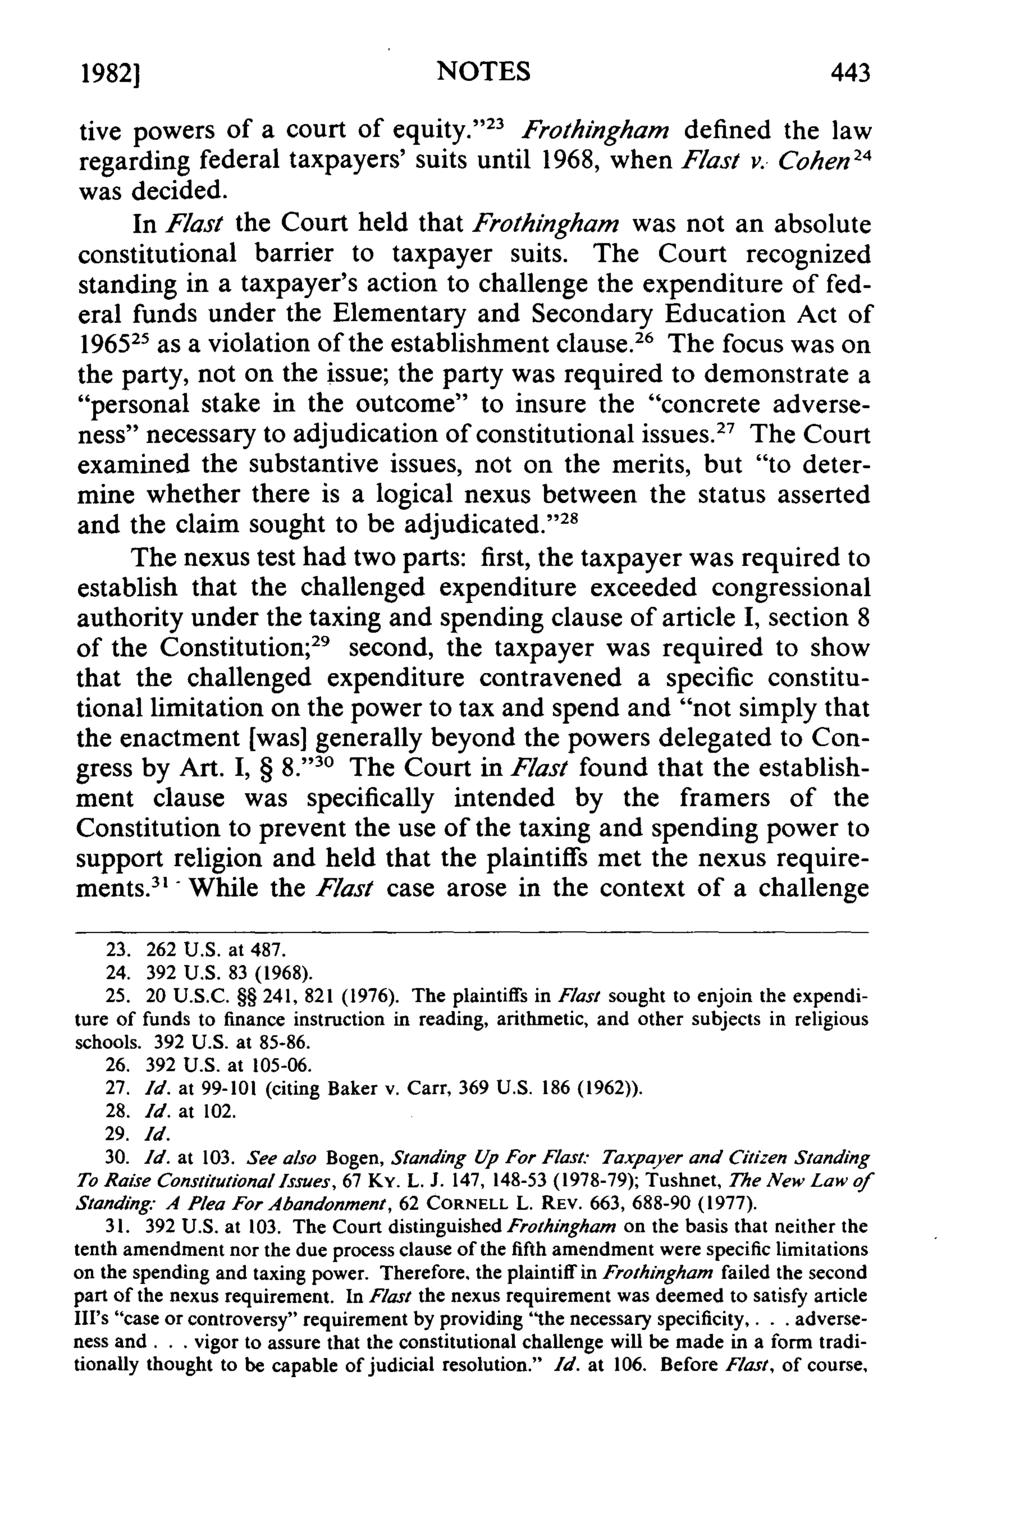 19821 NOTES tive powers of a court of equity. ' 23 Frothingham defined the law regarding federal taxpayers' suits until 1968, when Flast v. Cohen 24 was decided.